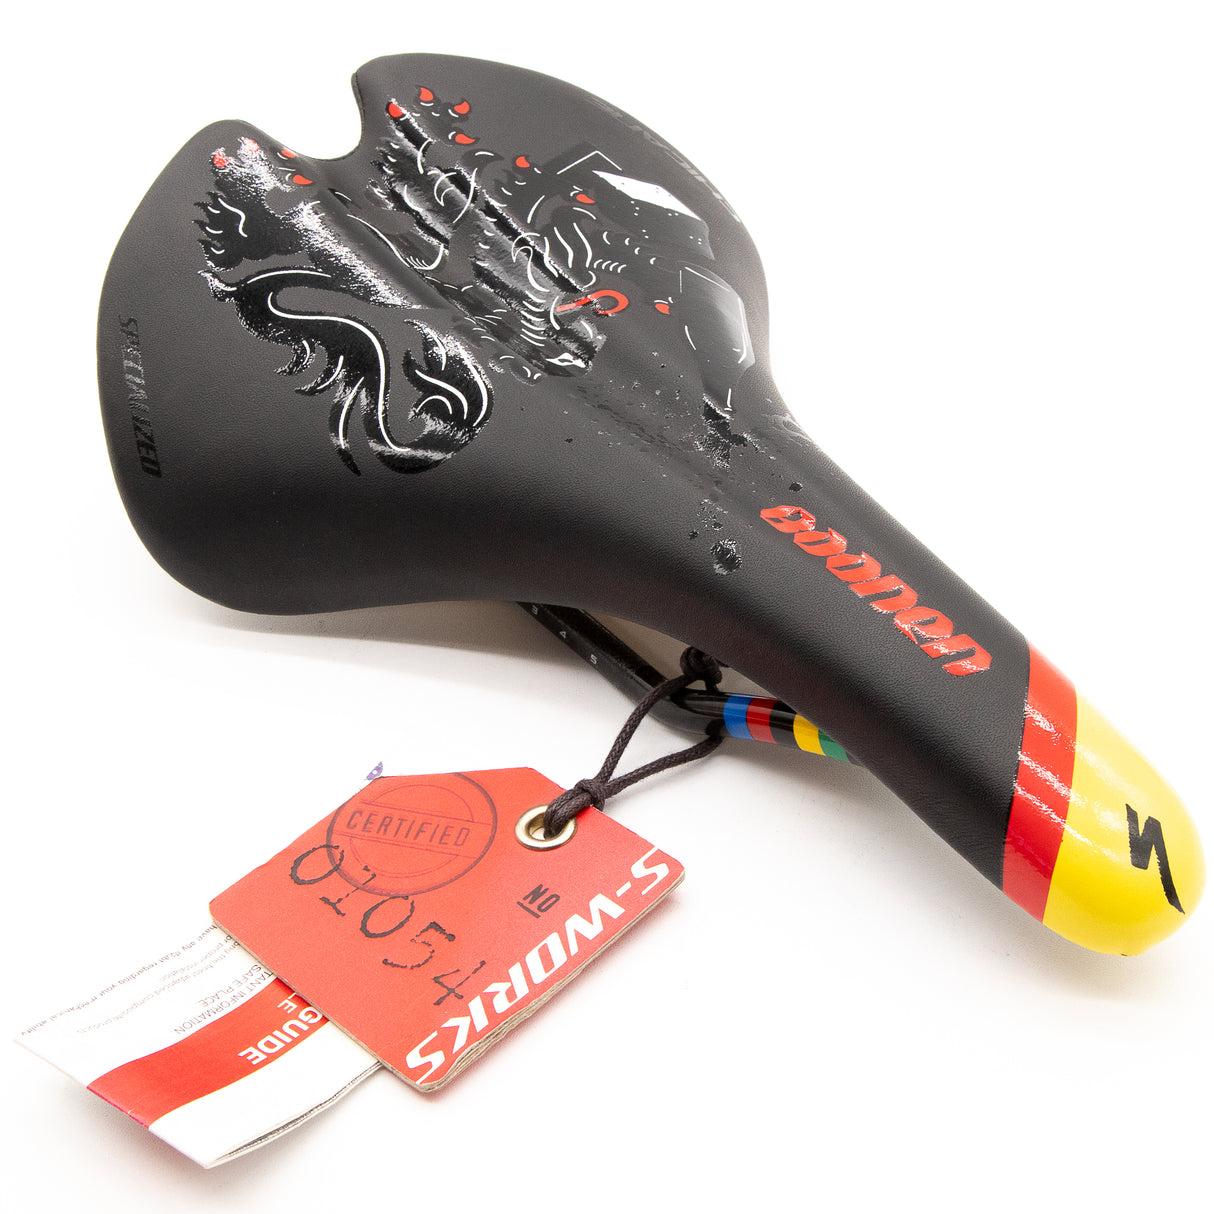 Specialized Chicane Boonen Carbon 168mm Saddle 245g